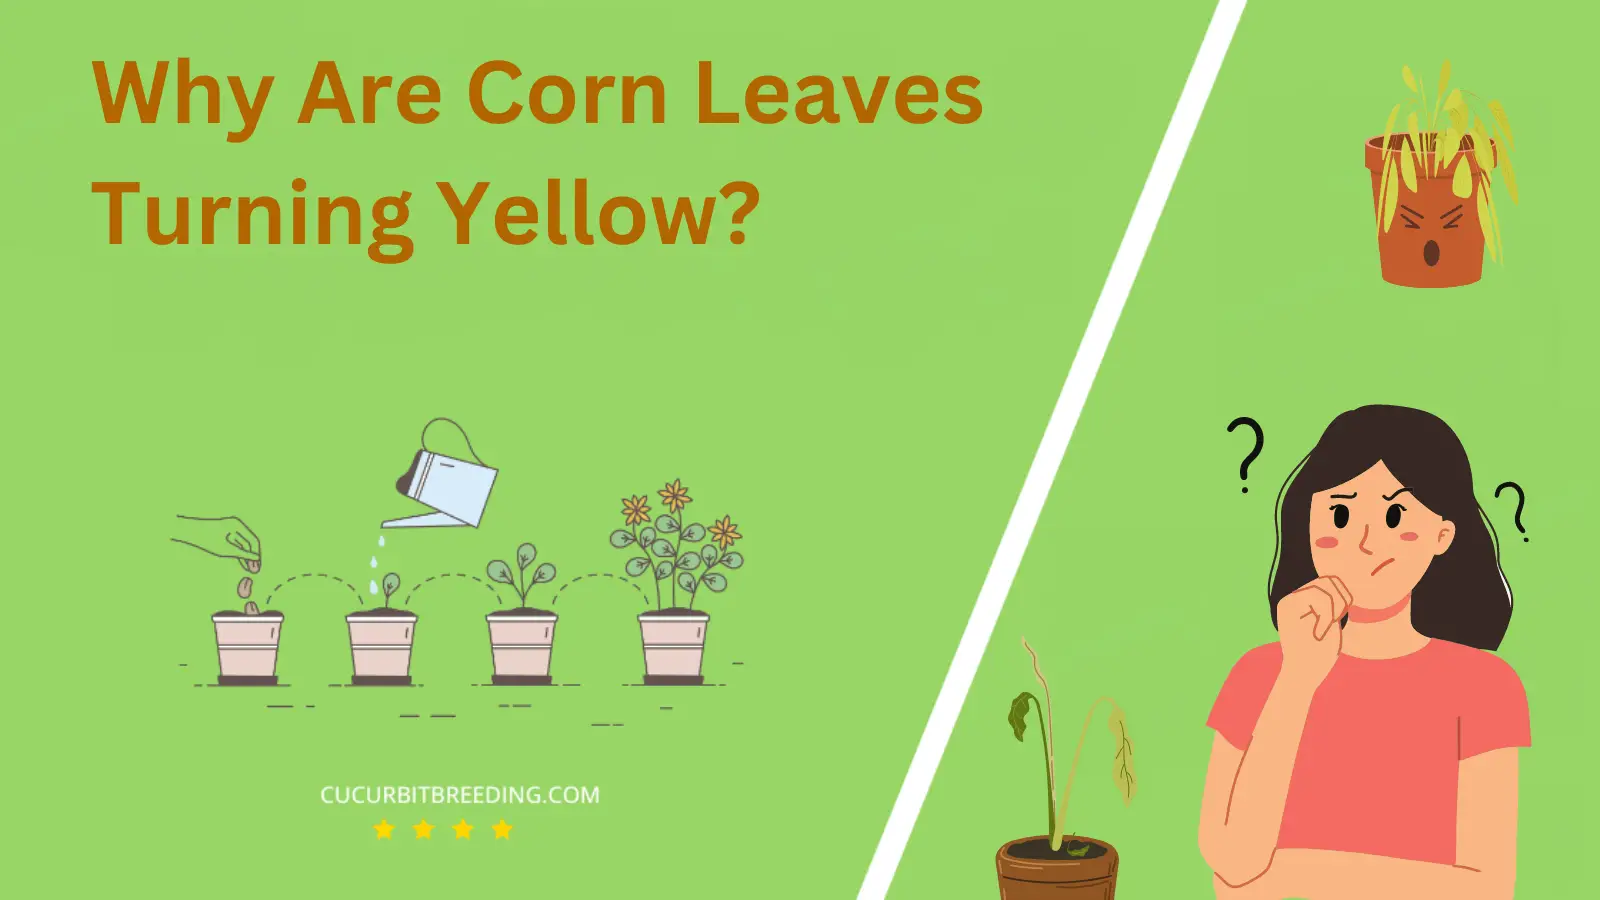 Why Are Corn Leaves Turning Yellow